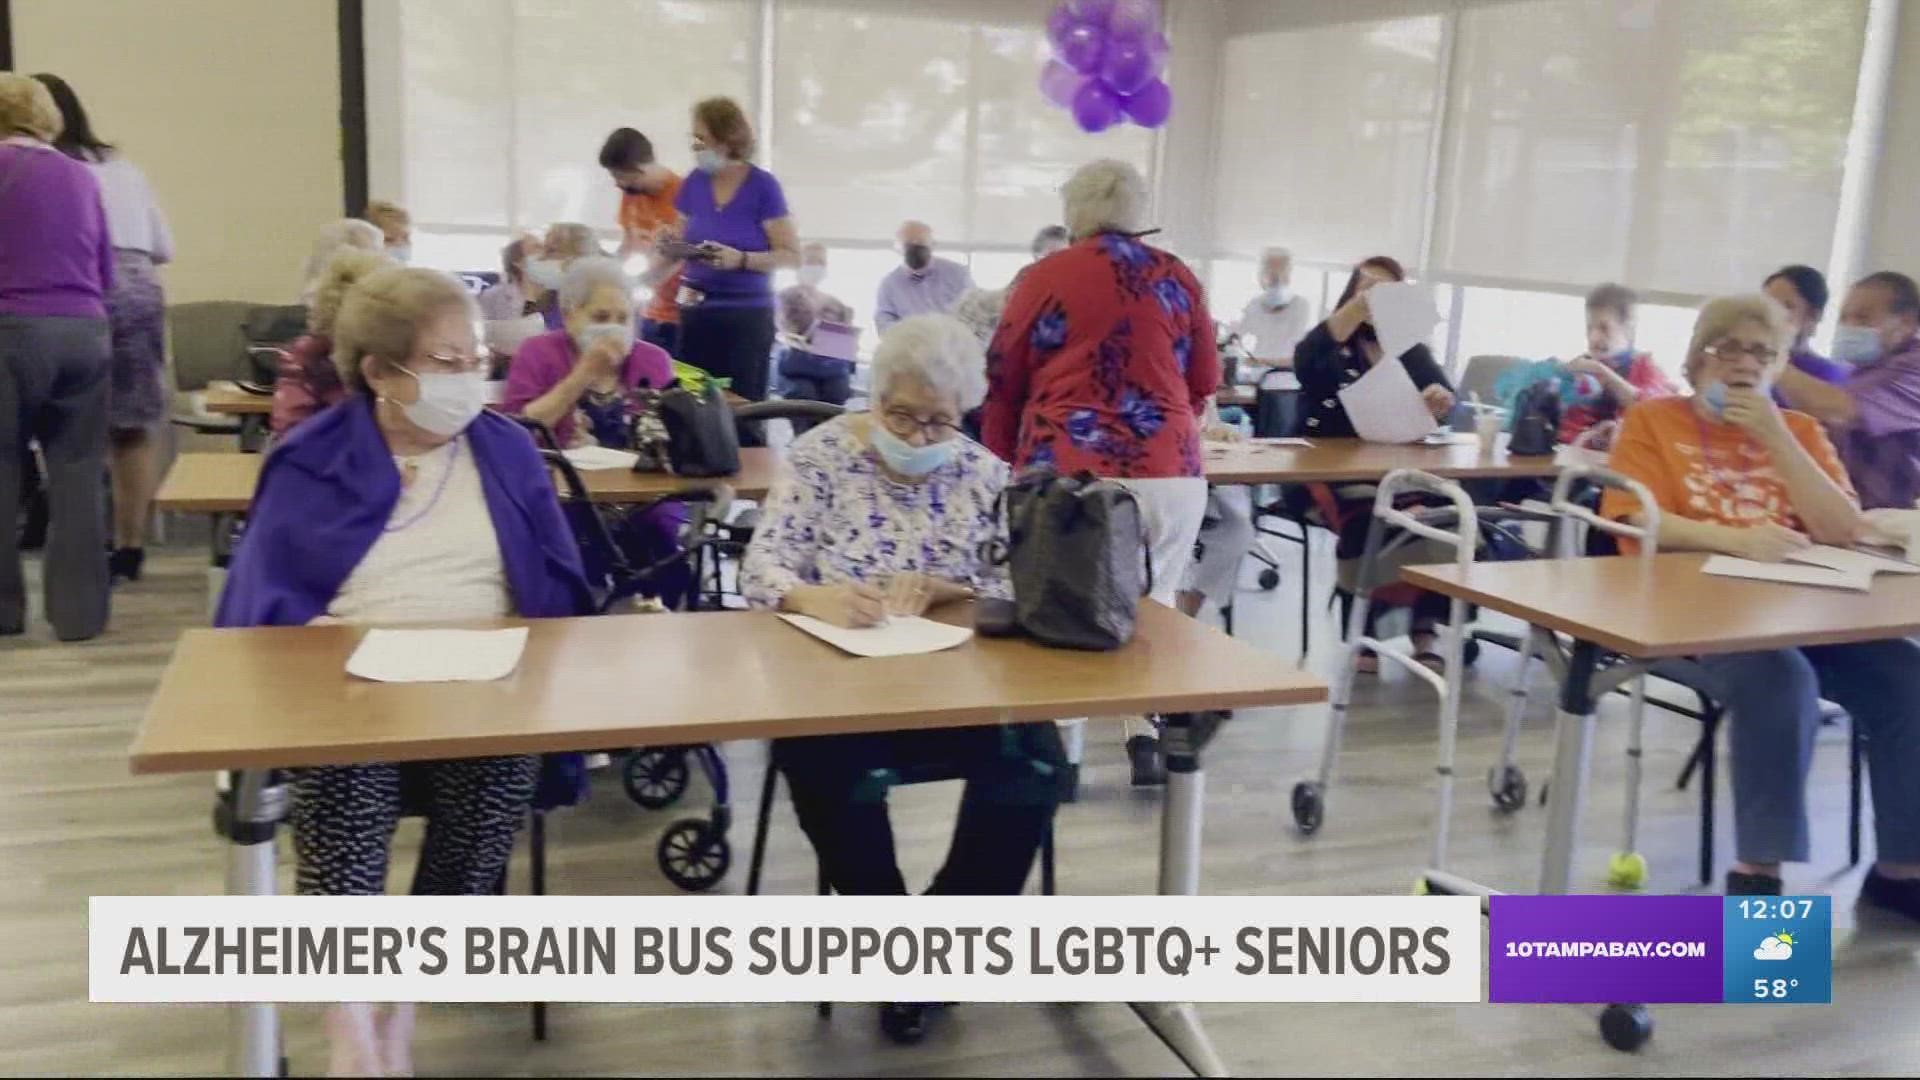 According to the Alzheimer's Association, a third of older LGBTQ+ adults live alone.